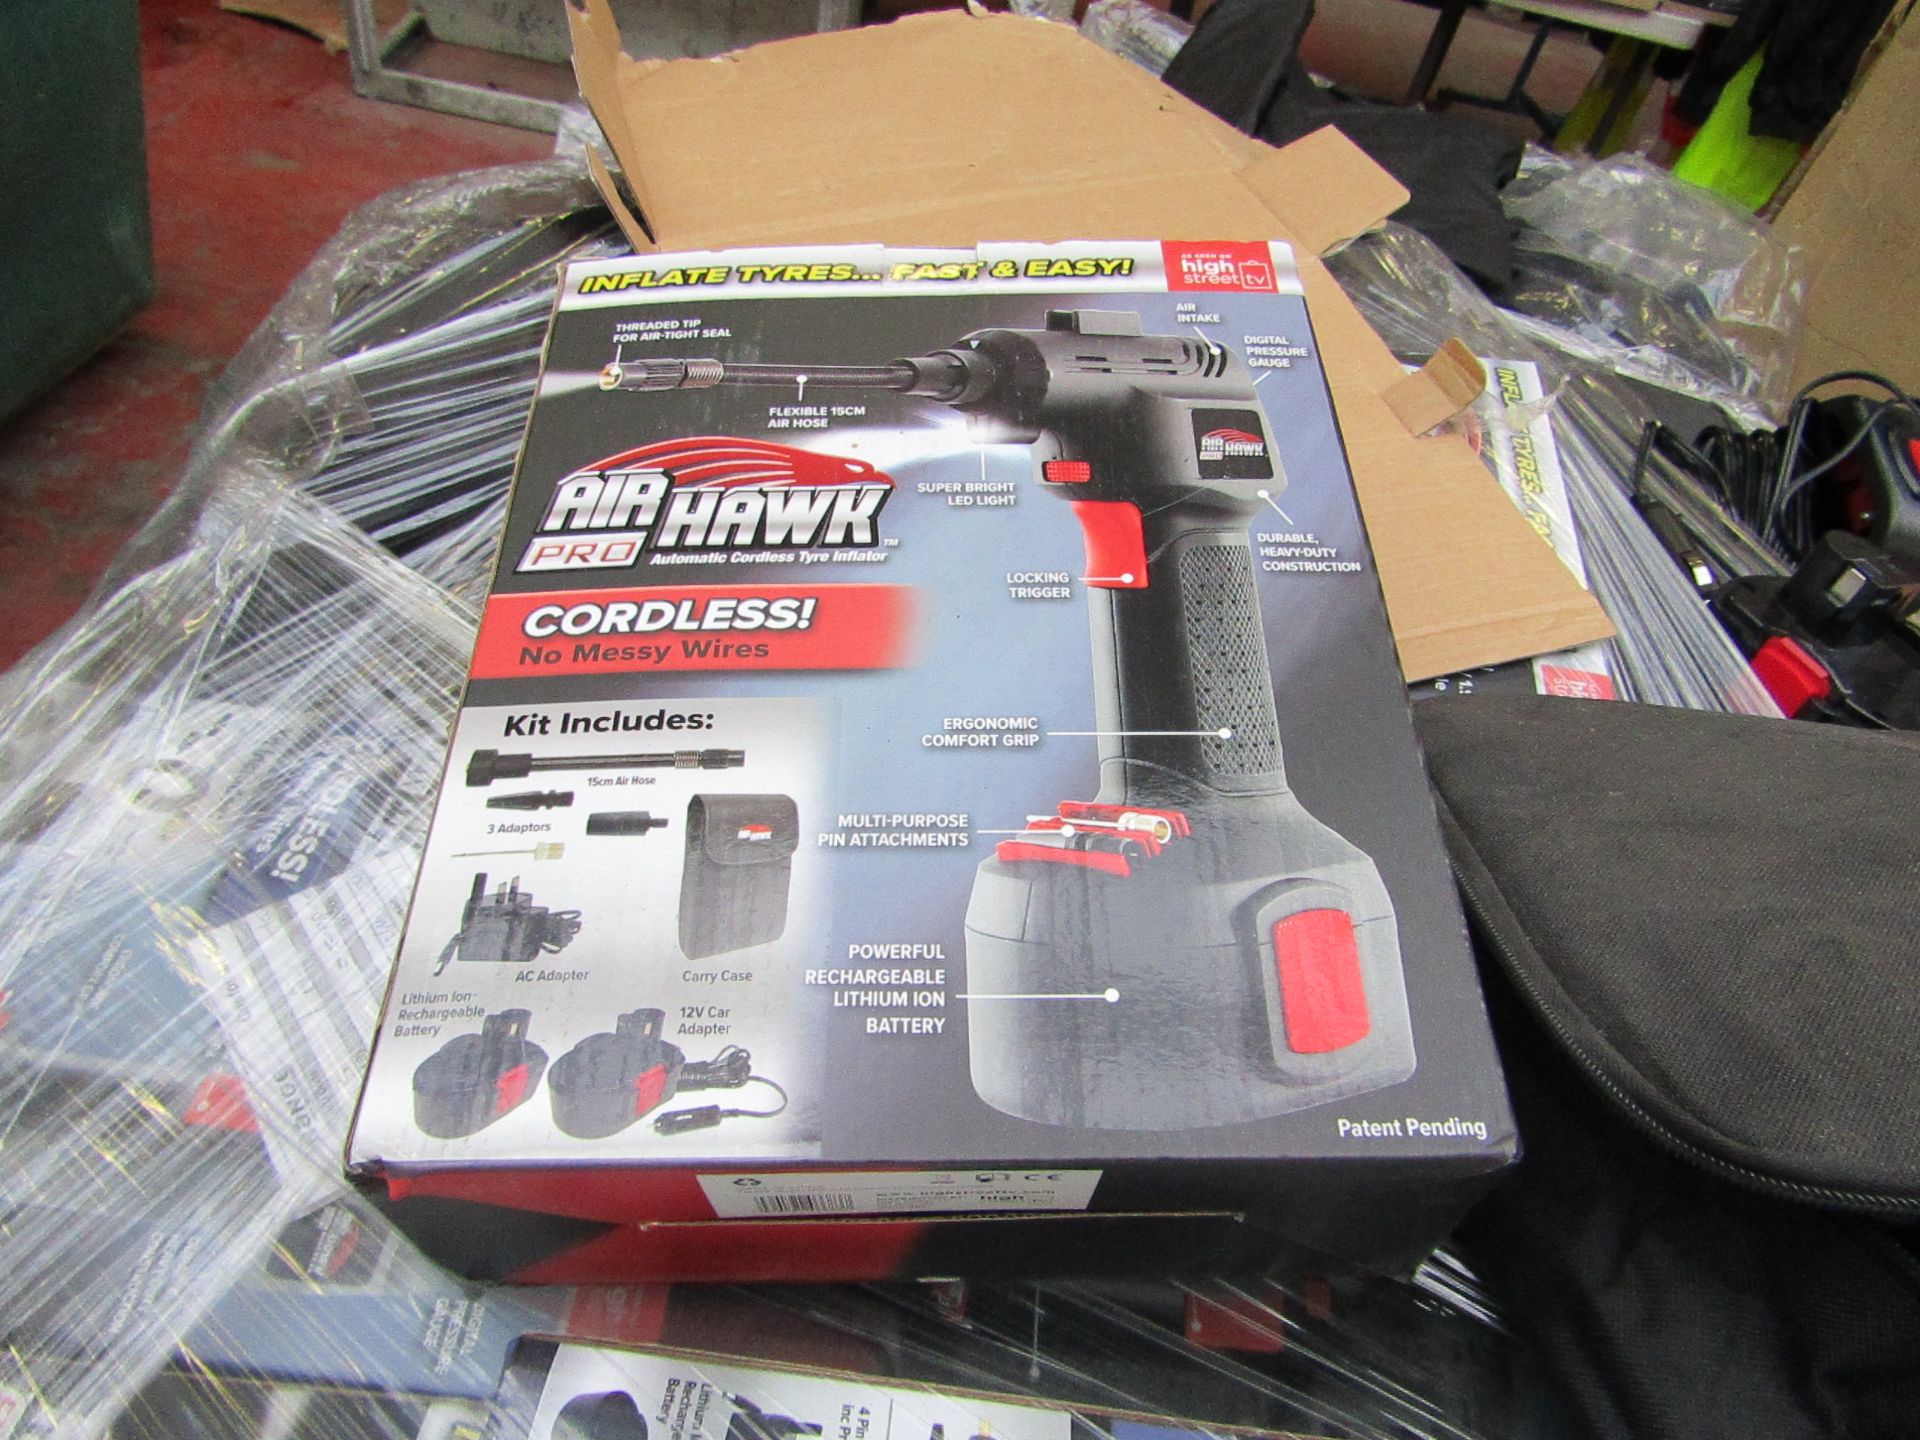 Air Hawk Pro Cordless hand held compressor, tested working and boxed | SKU C5060191466837 | RRP £